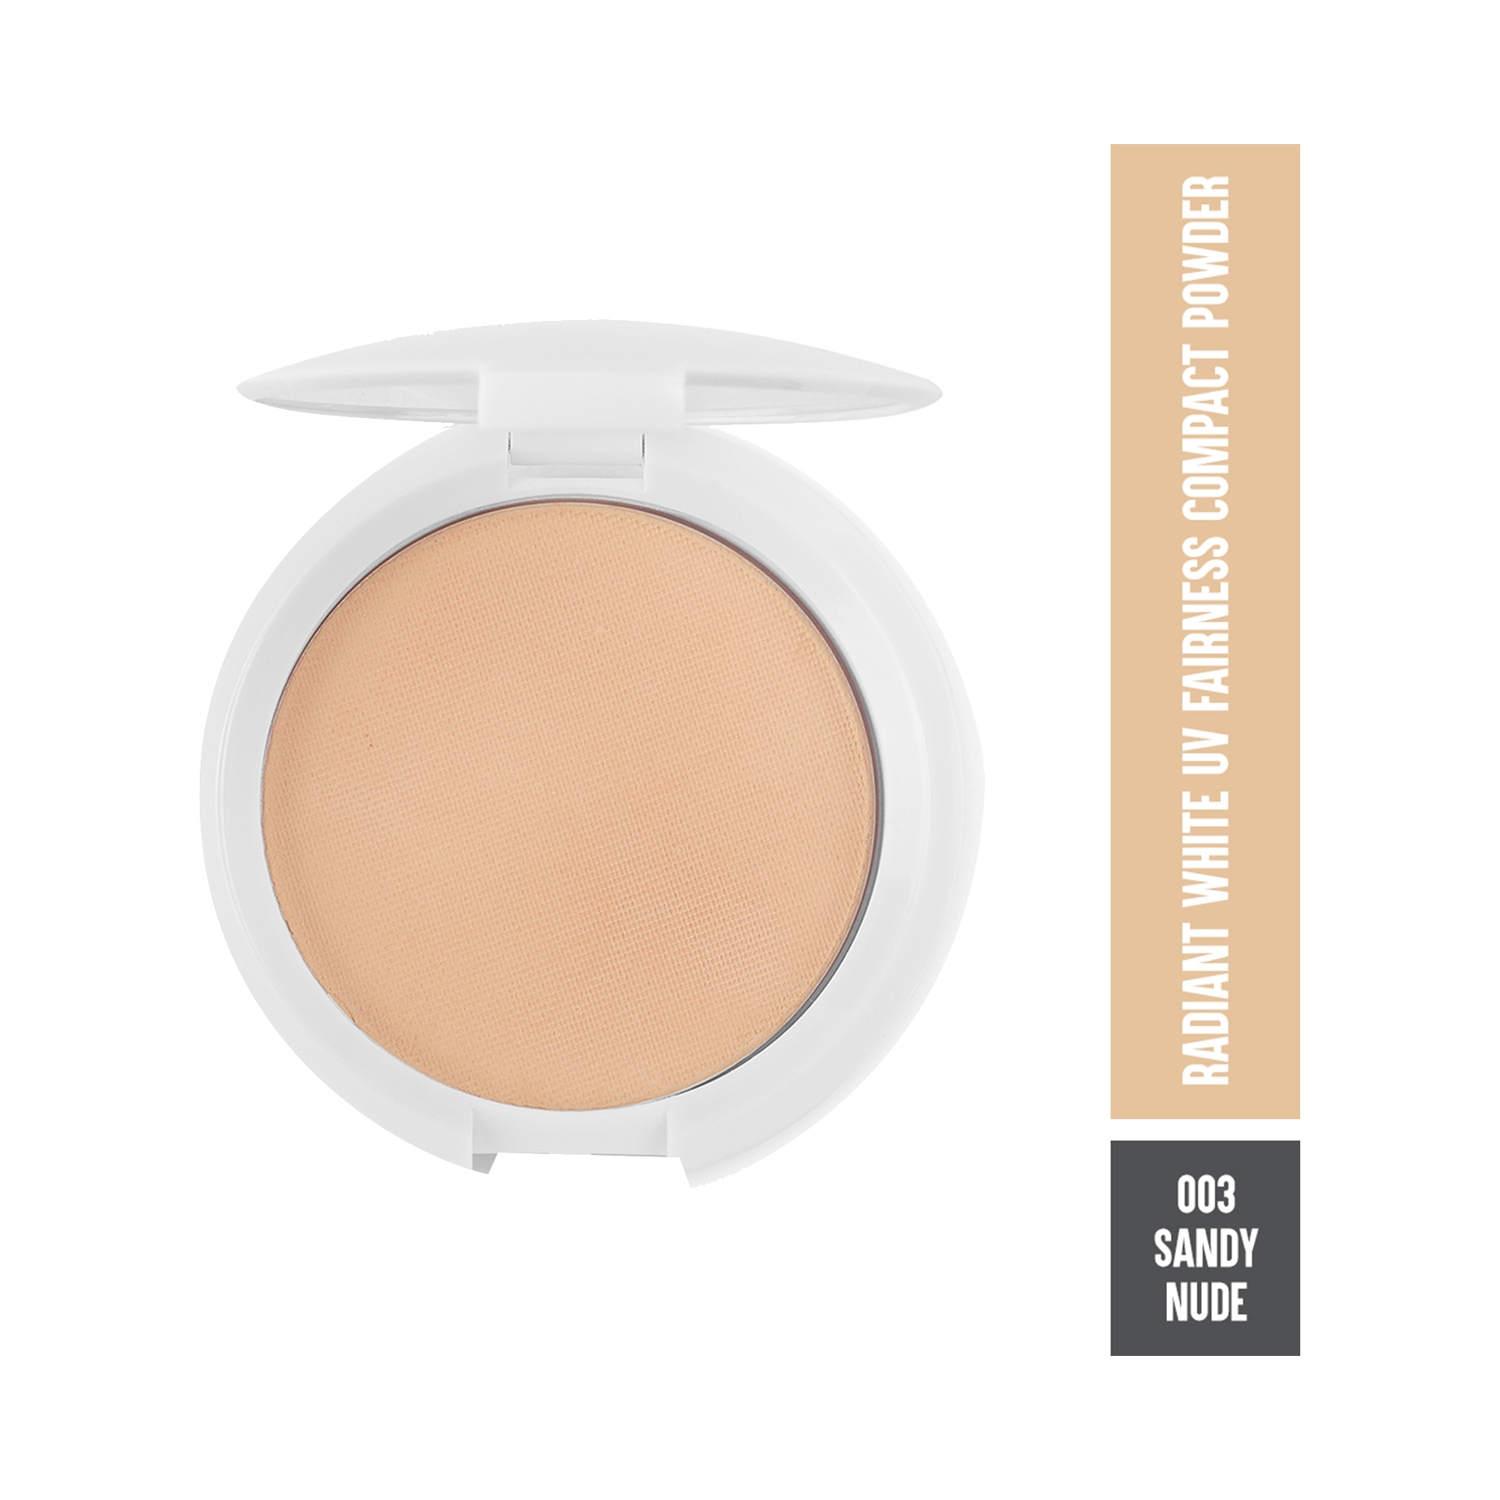 Colorbar | Colorbar Radiant White UV Fairness Compact Powder With SPF 18 - 003 Sandy Nude (9g)